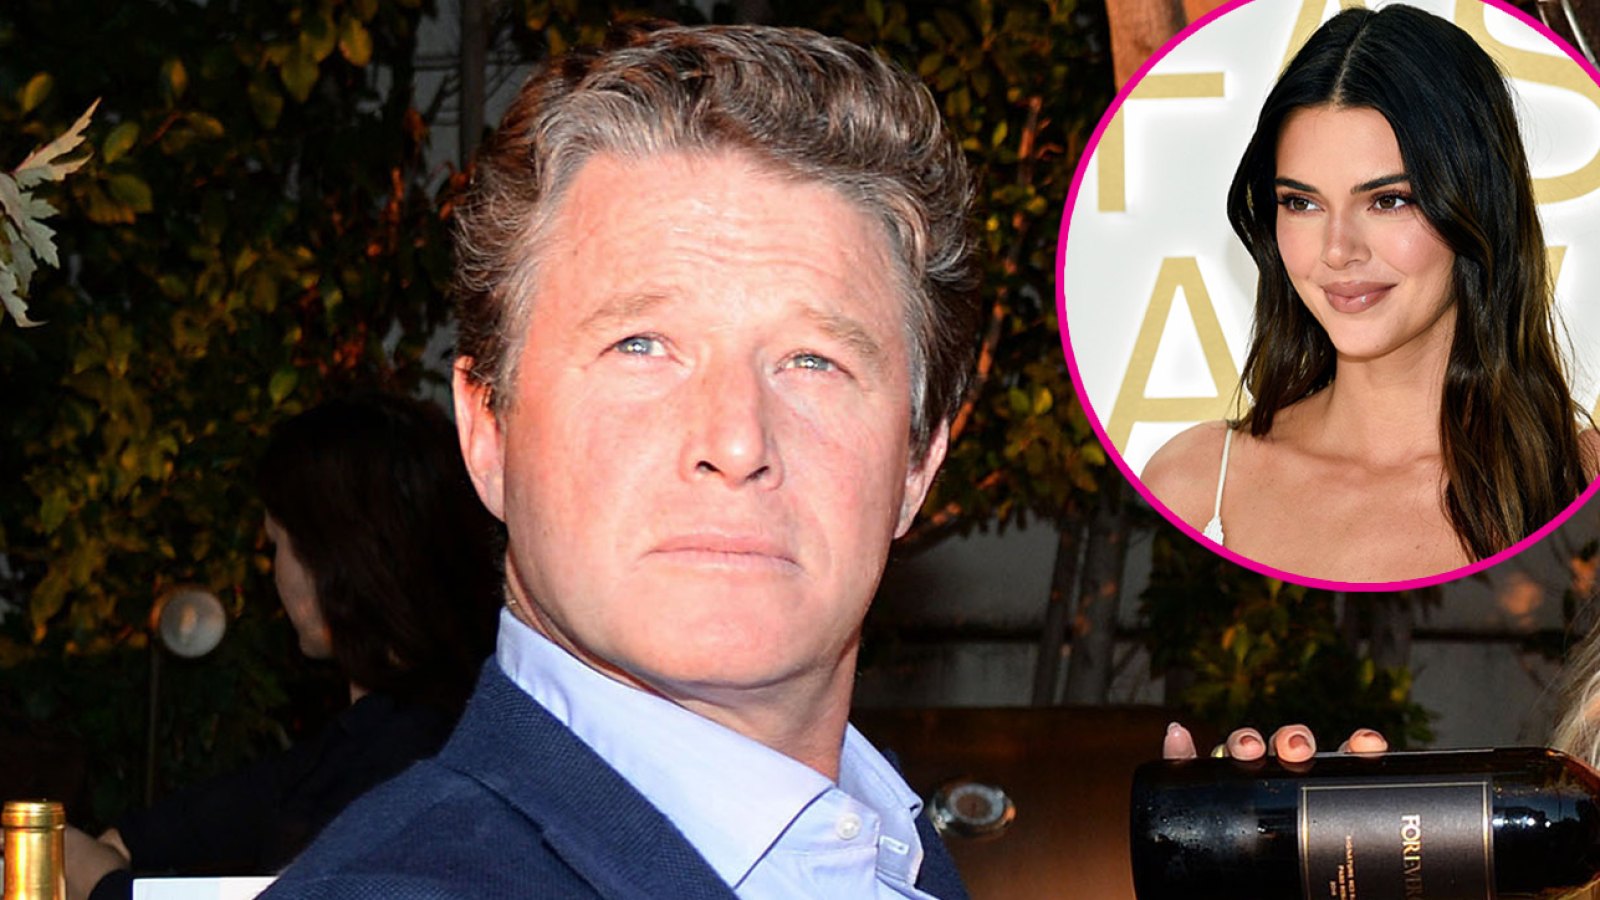 Billy Bush Reportedly Caught Making Crude Kendall Jenner Joke in Hot Mic Moment - 860 EXCLUSIVE Ali Larter Launches Her Wine Brand Forever Gold By Ali Larter